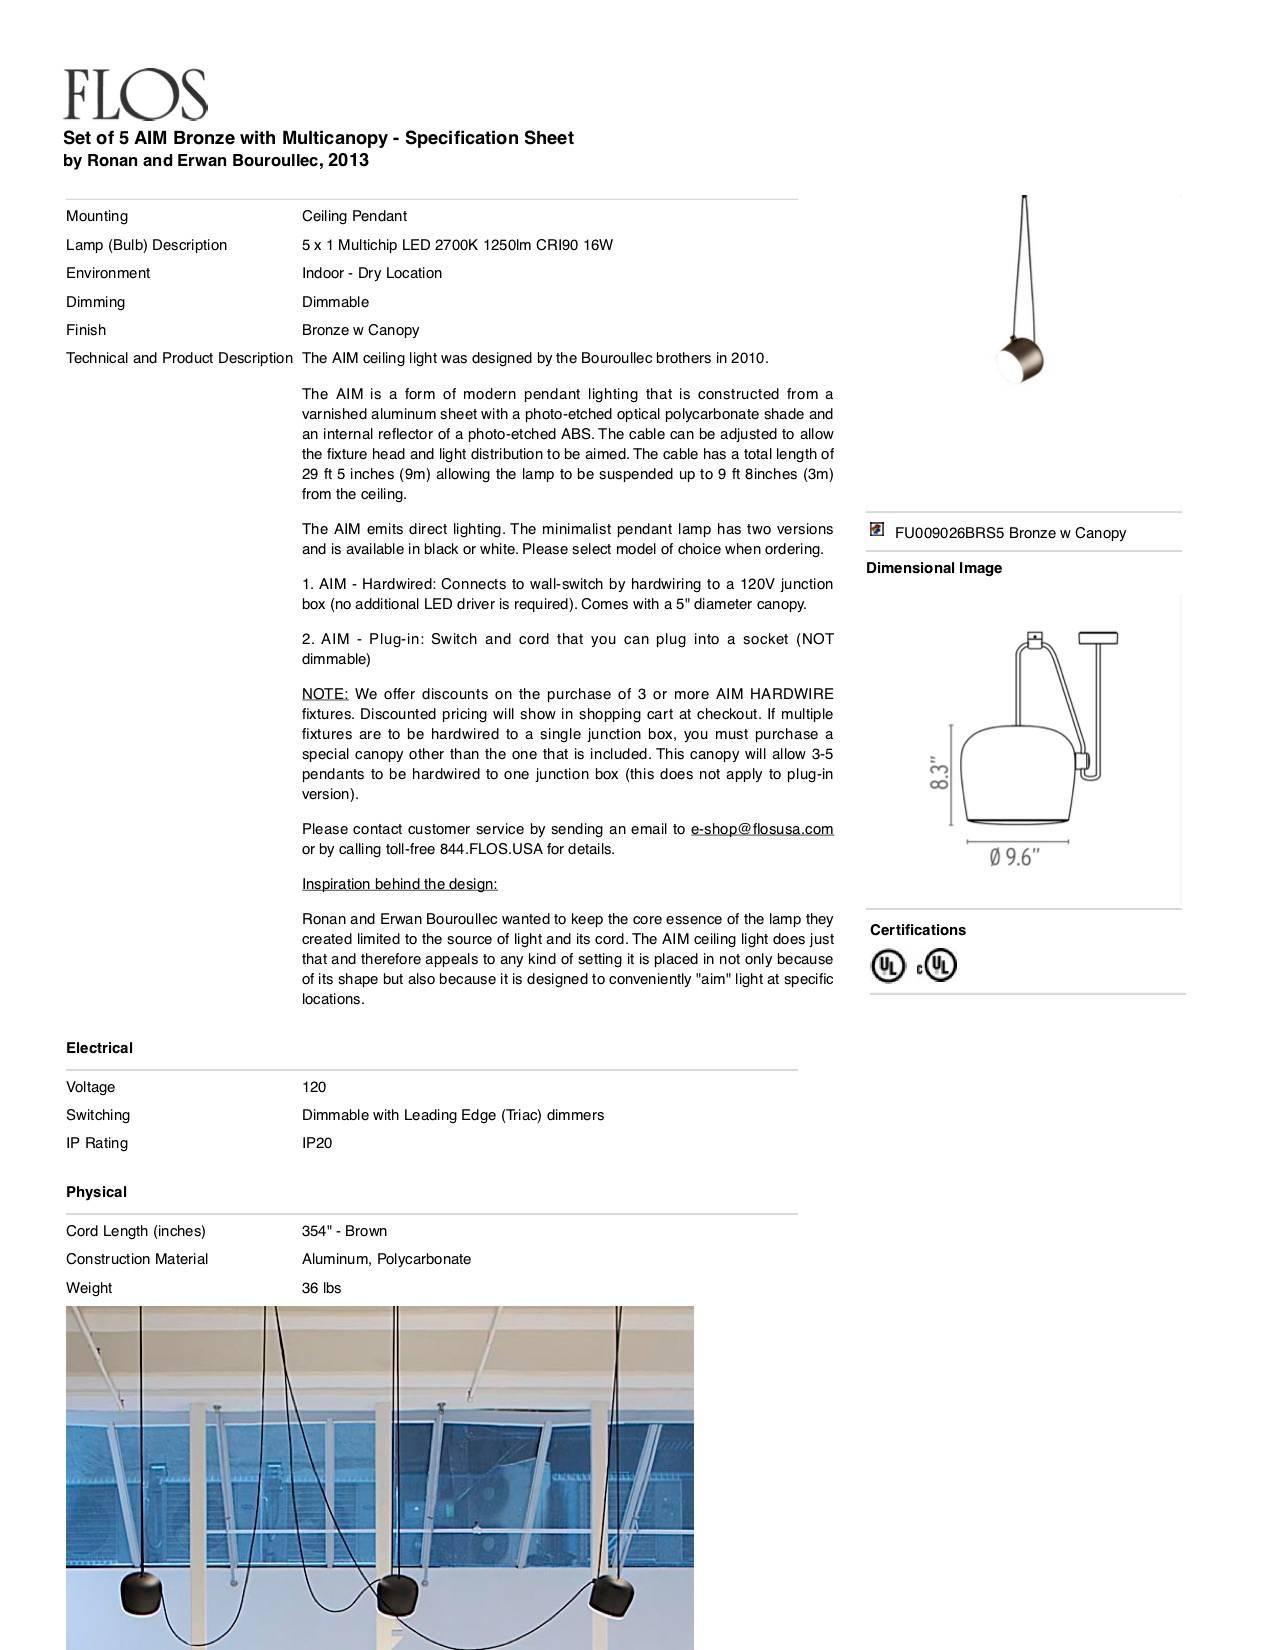 Contemporary Bouroullec Modern Bronze Pendant Aim Five Light Set & Canopy for FLOS, in stock